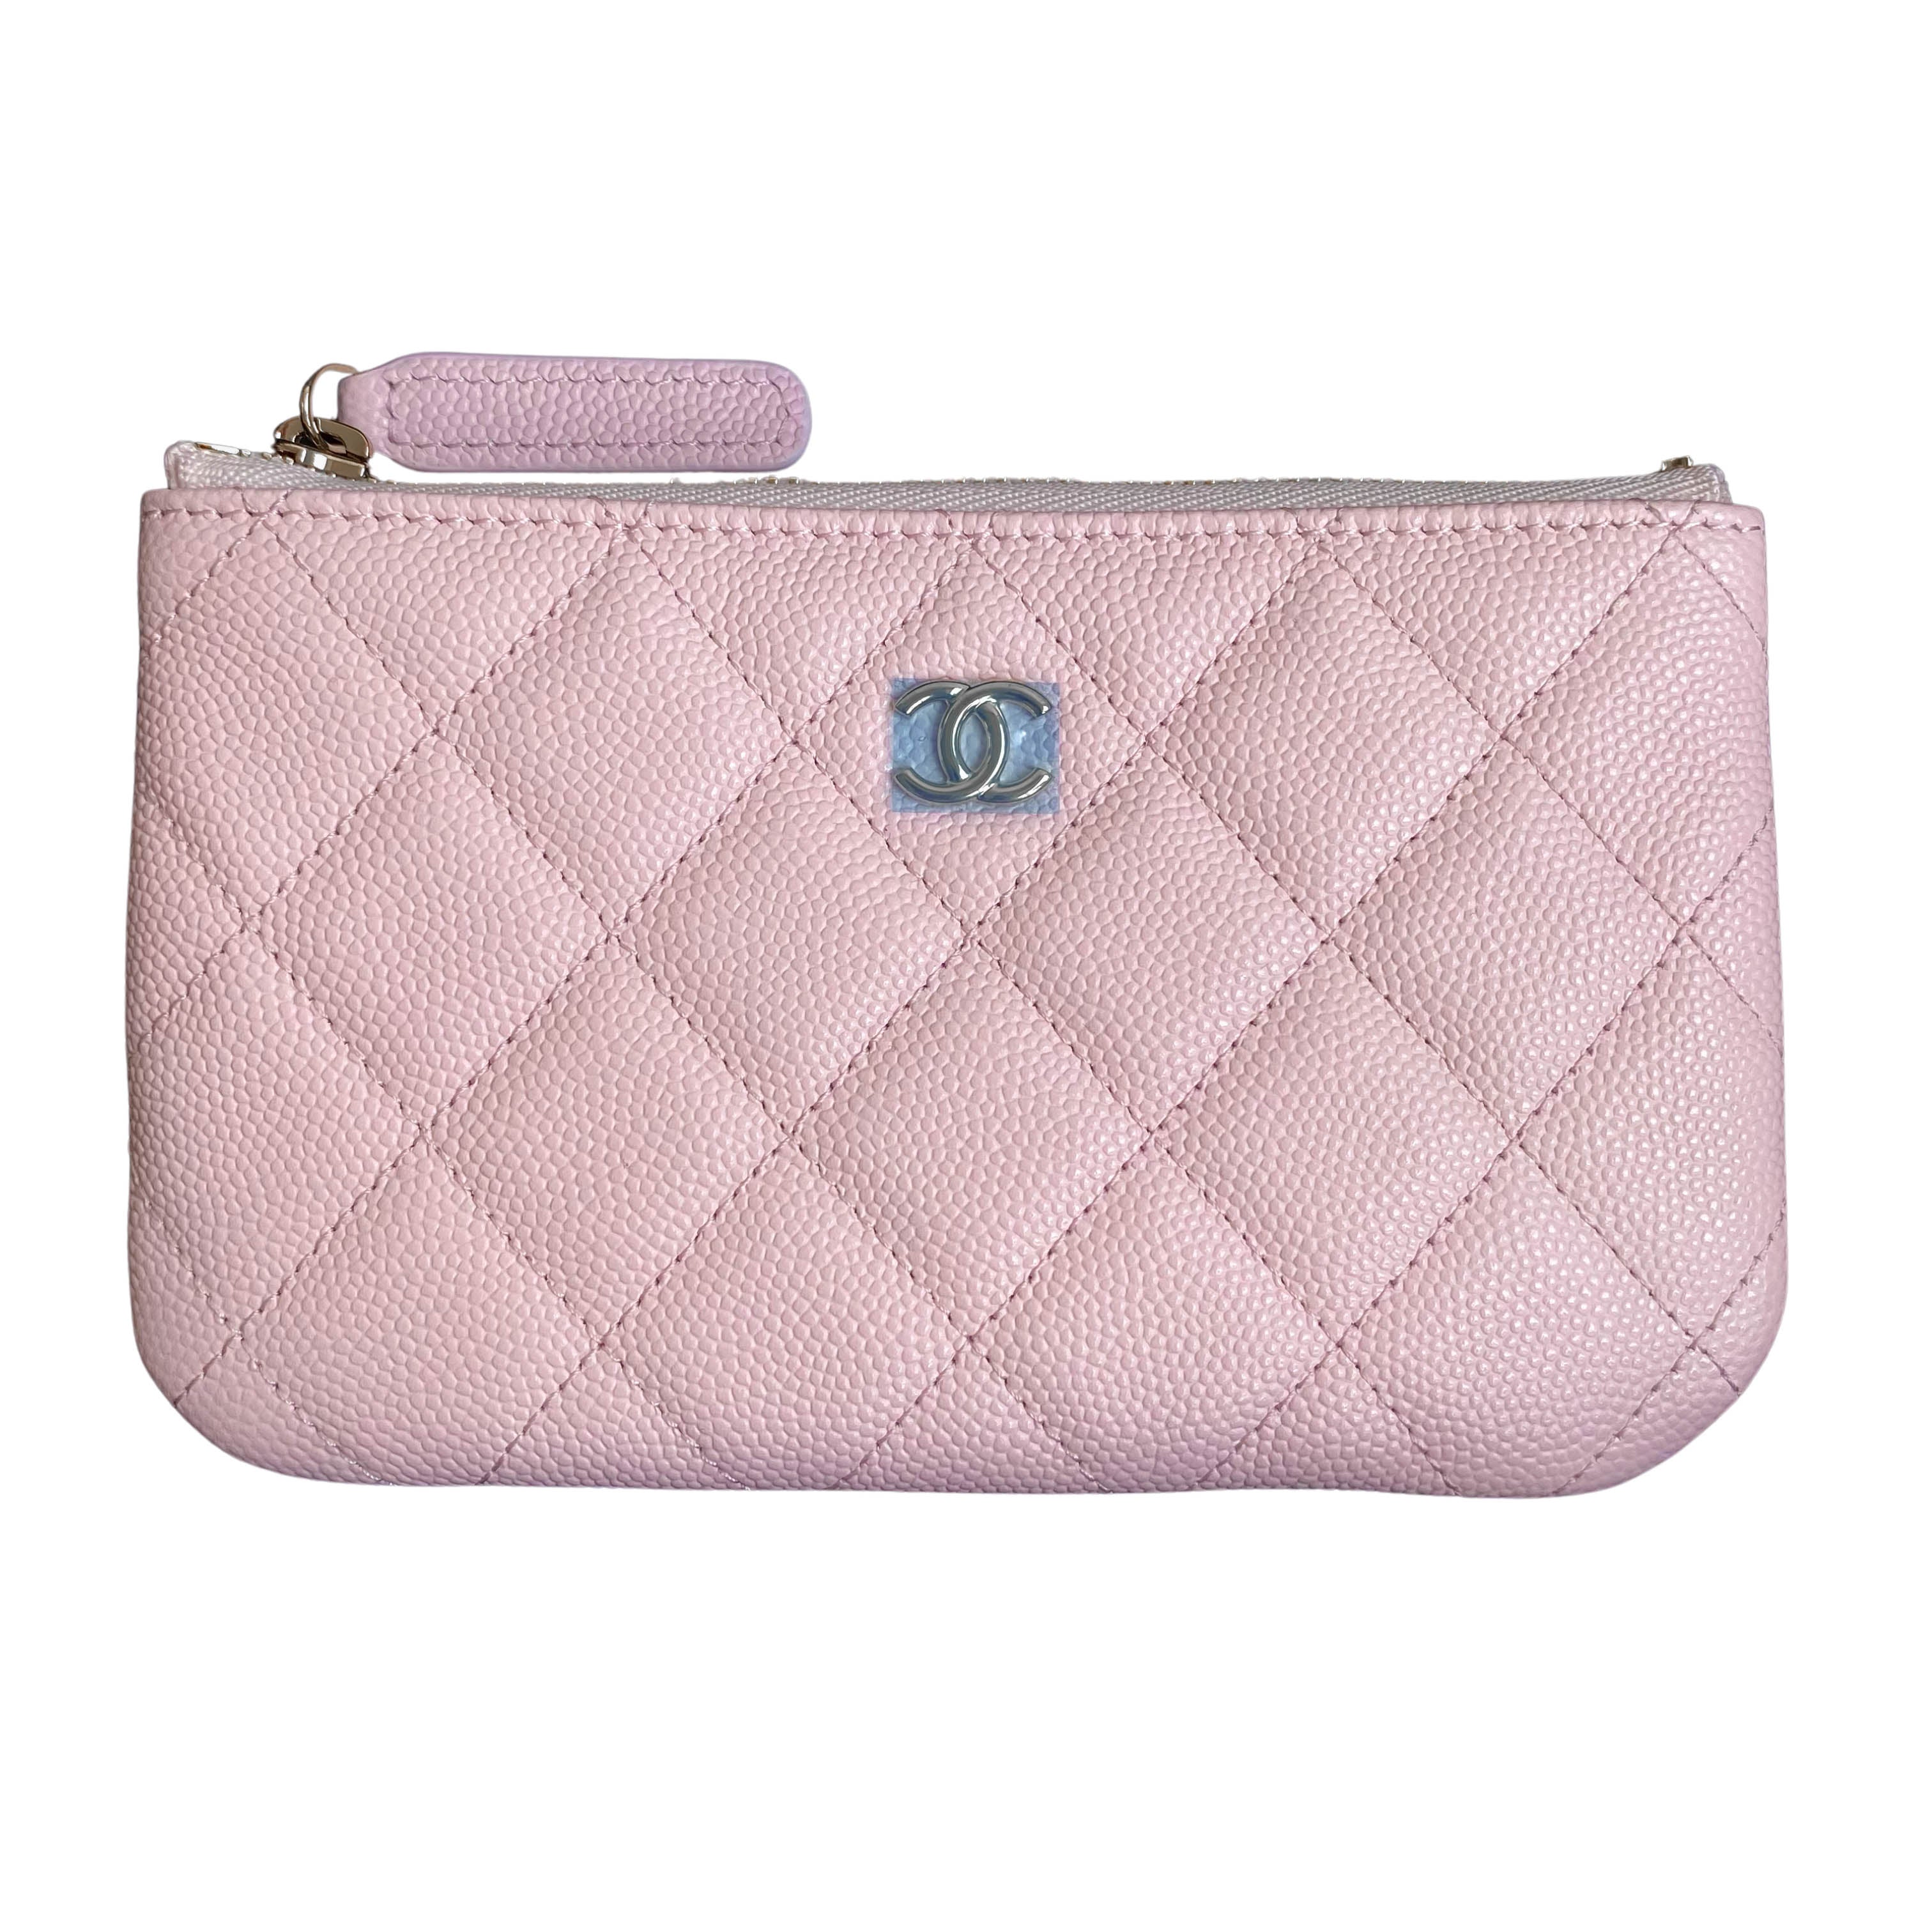 Get the best deals on chanel leather cosmetic bag when you shop